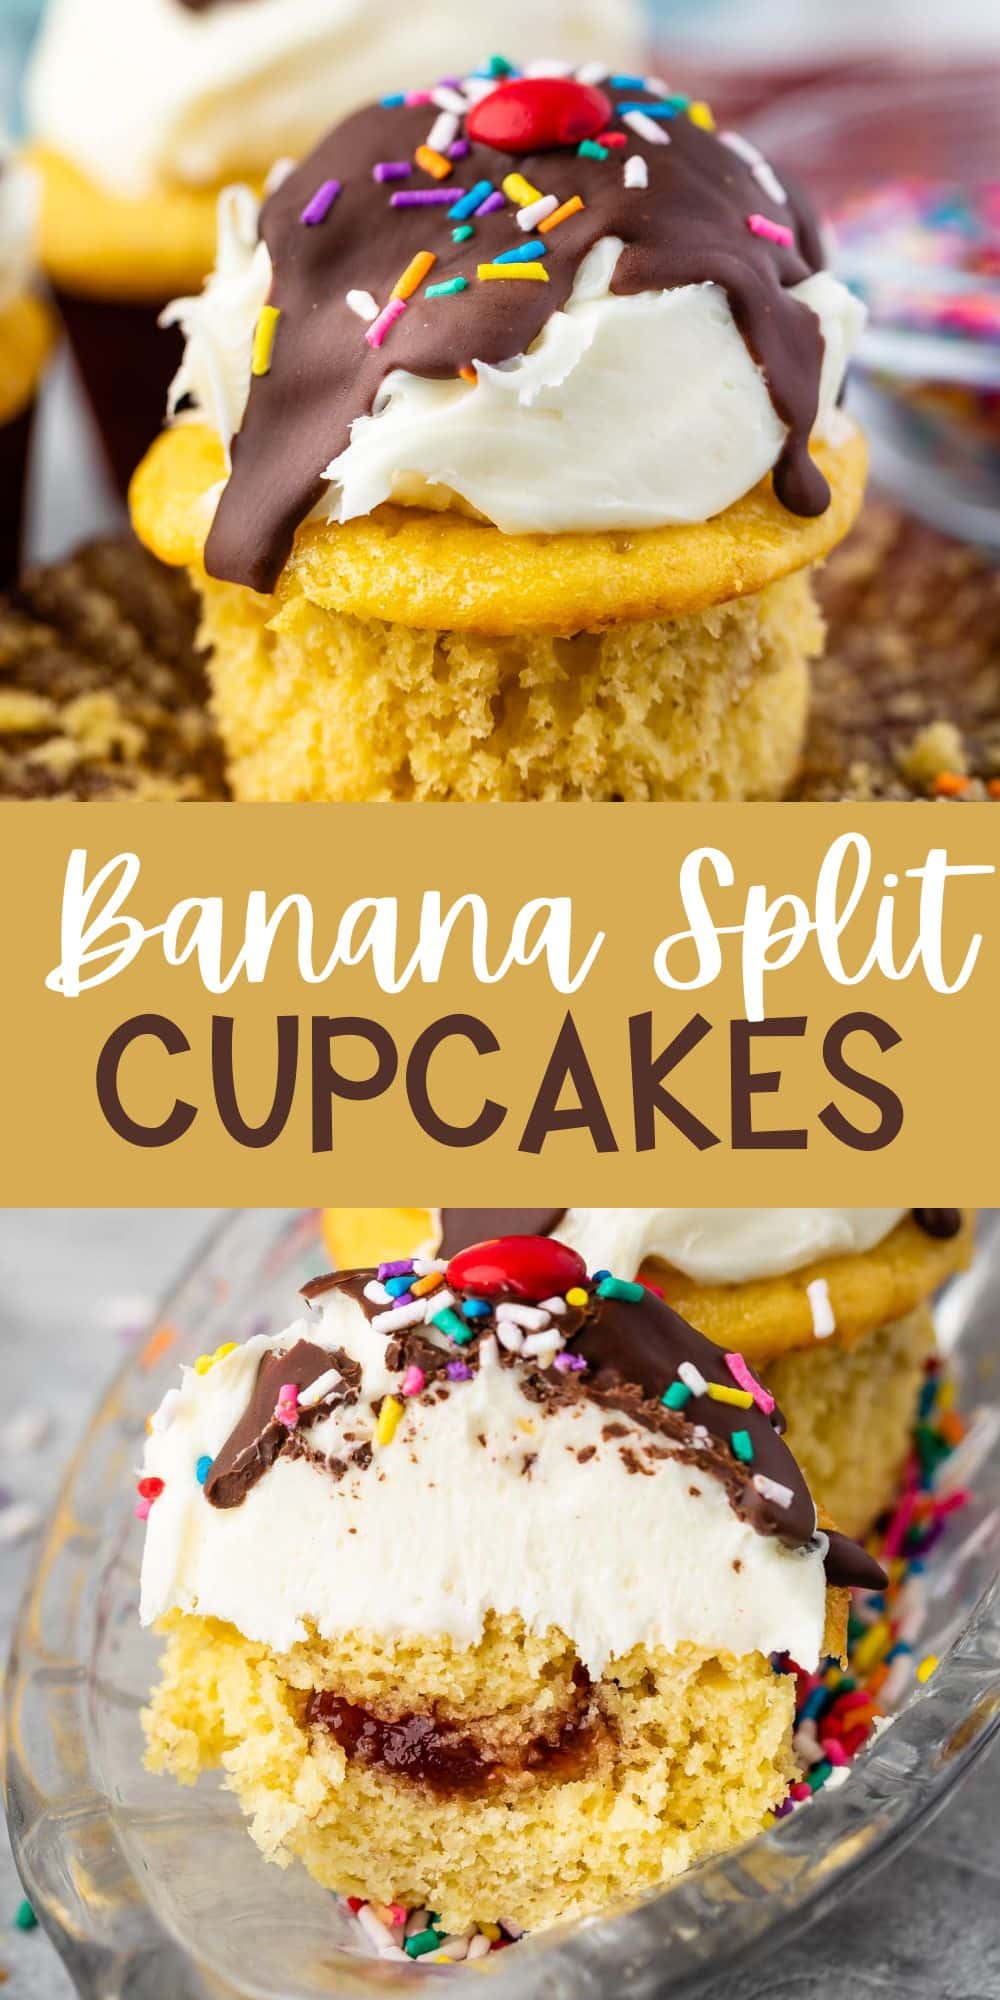 two photos of cupcake with frosting replicating and ice cream sundae with words on the image.